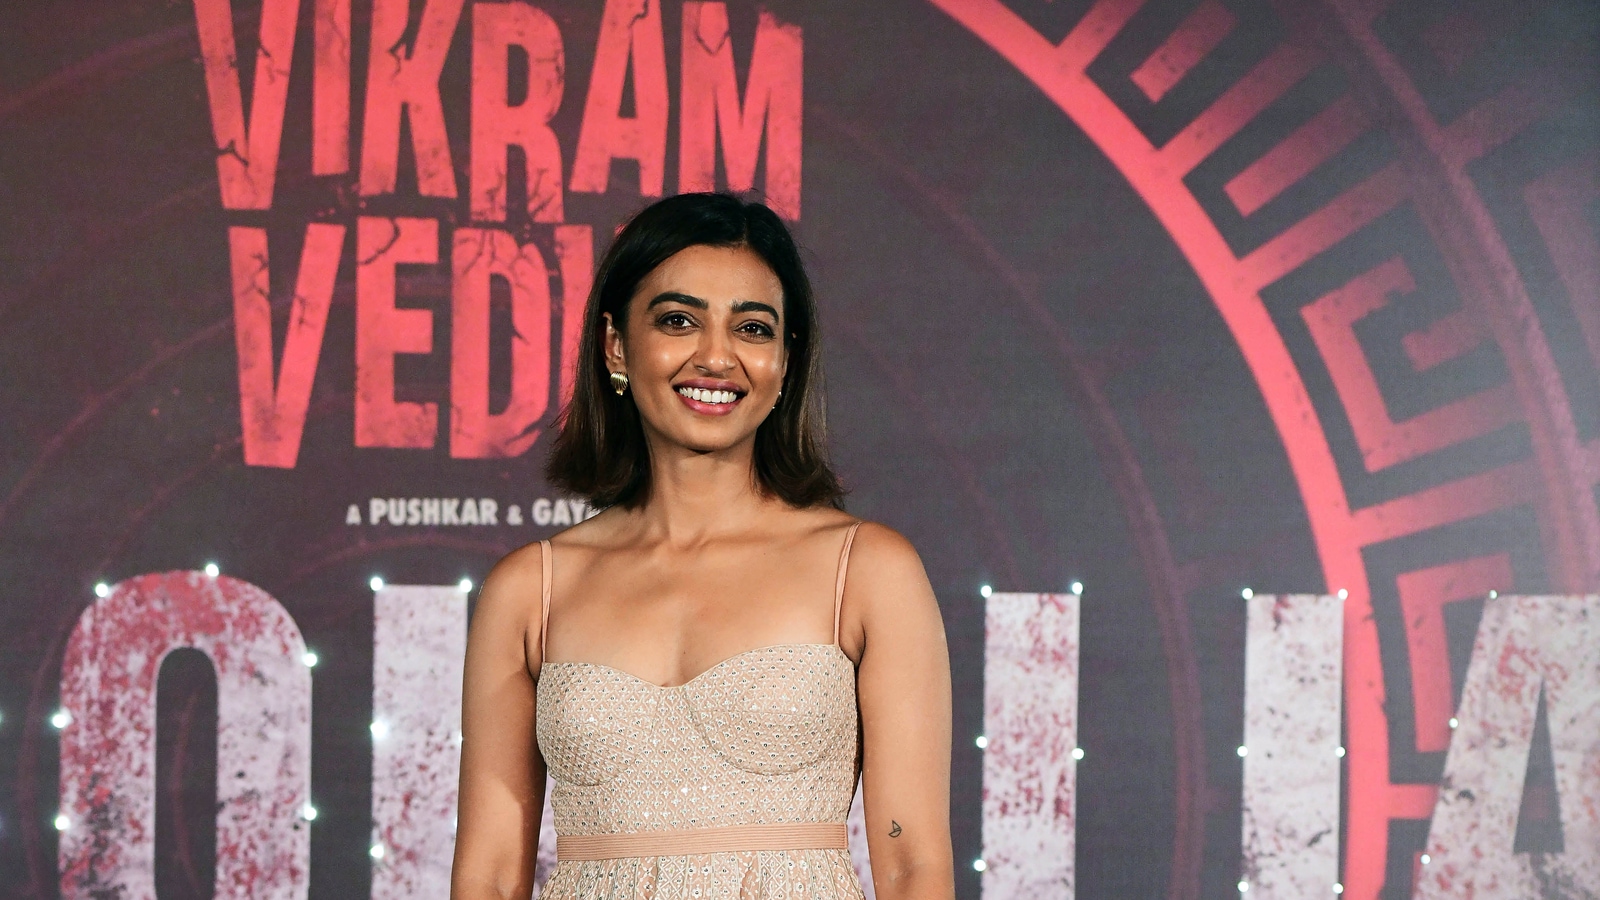 radhika-apte-says-she-wanted-a-bigger-role-in-vikram-vedha-i-did-it-as-i-wanted-to-work-with-the-directors